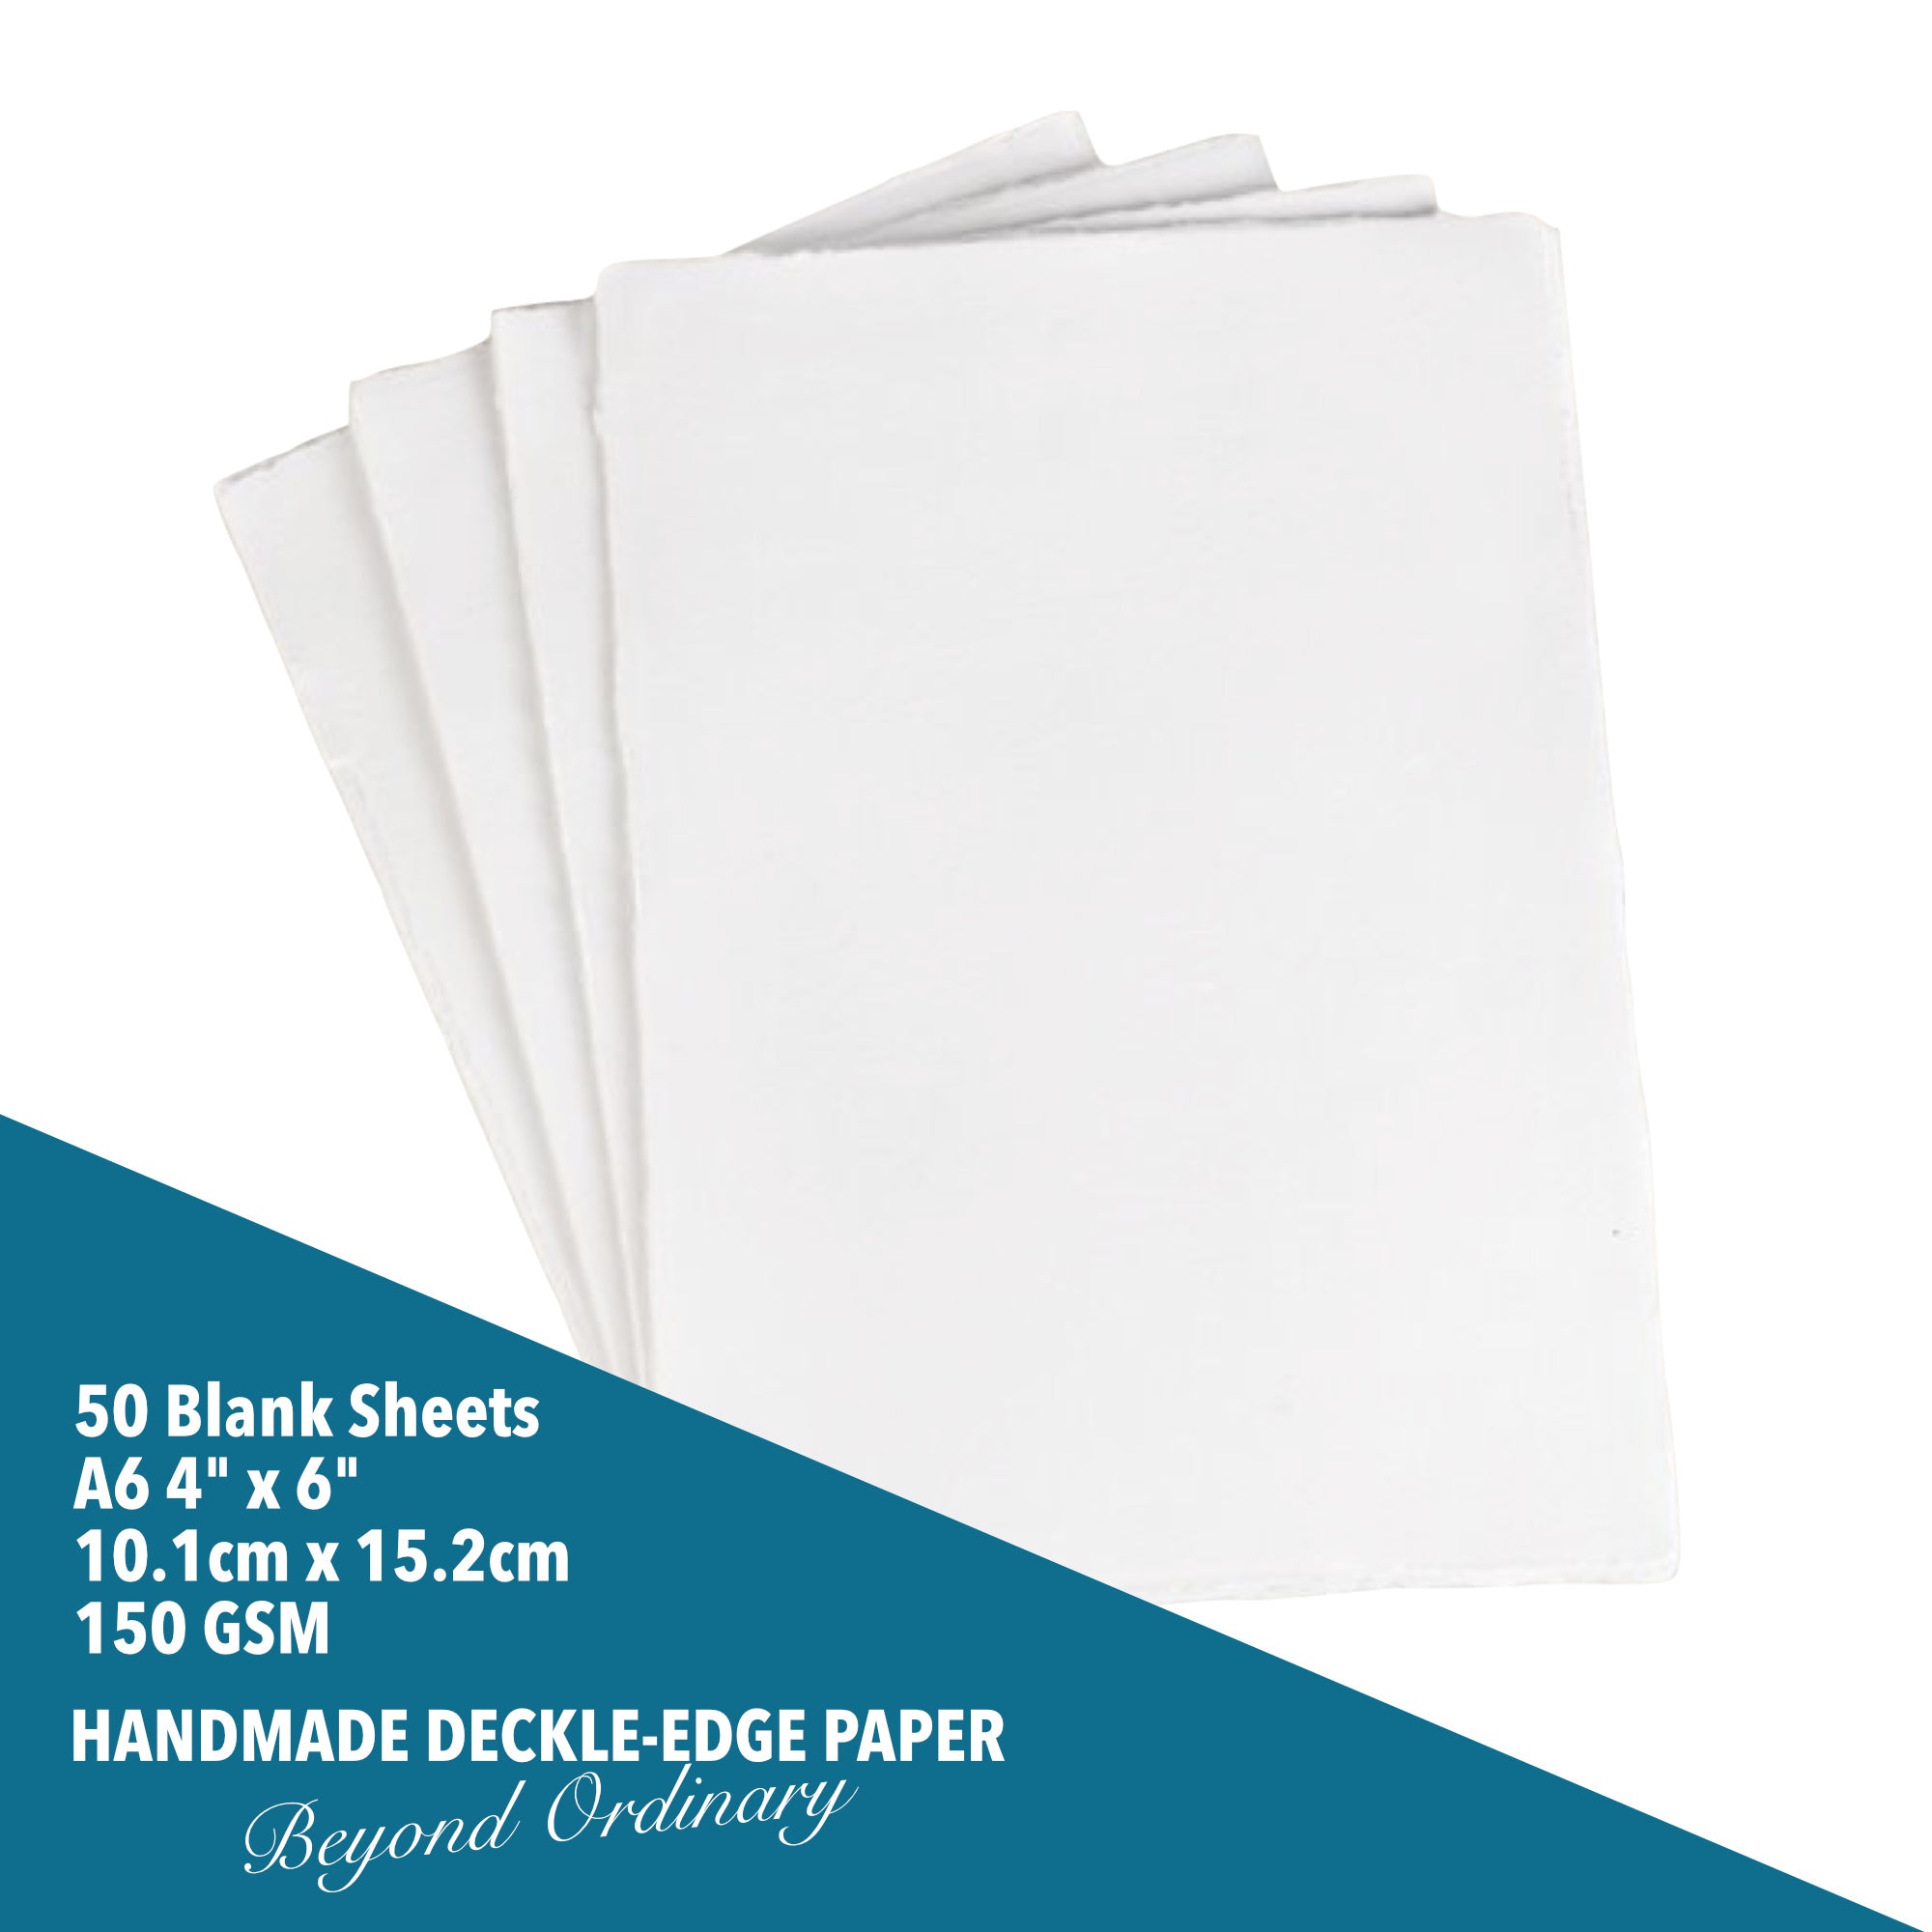 What is a Deckle Edge?